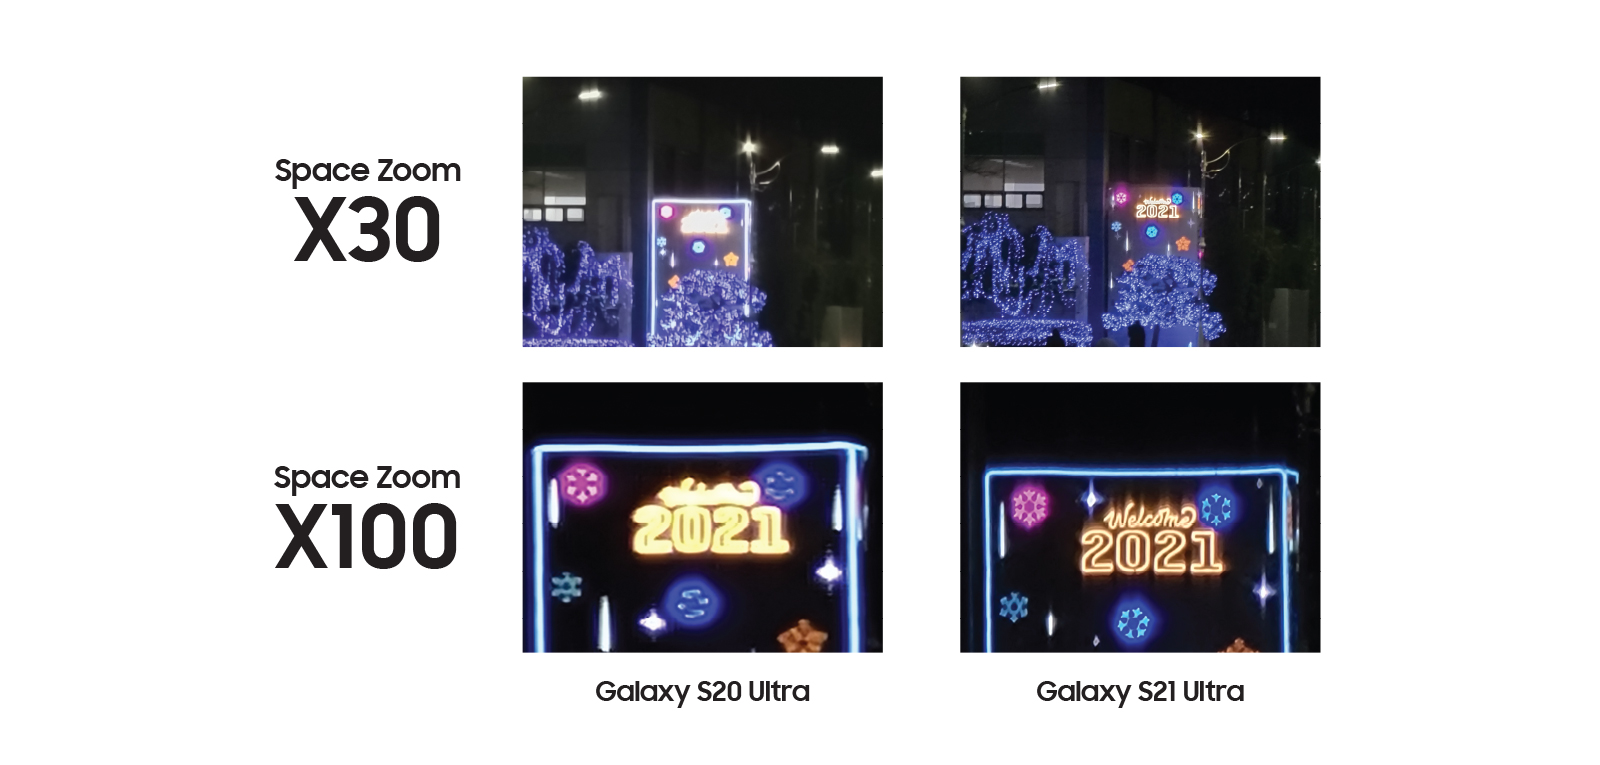 Showing the image comparison for a better output when shooting the neon sign in a dark scene